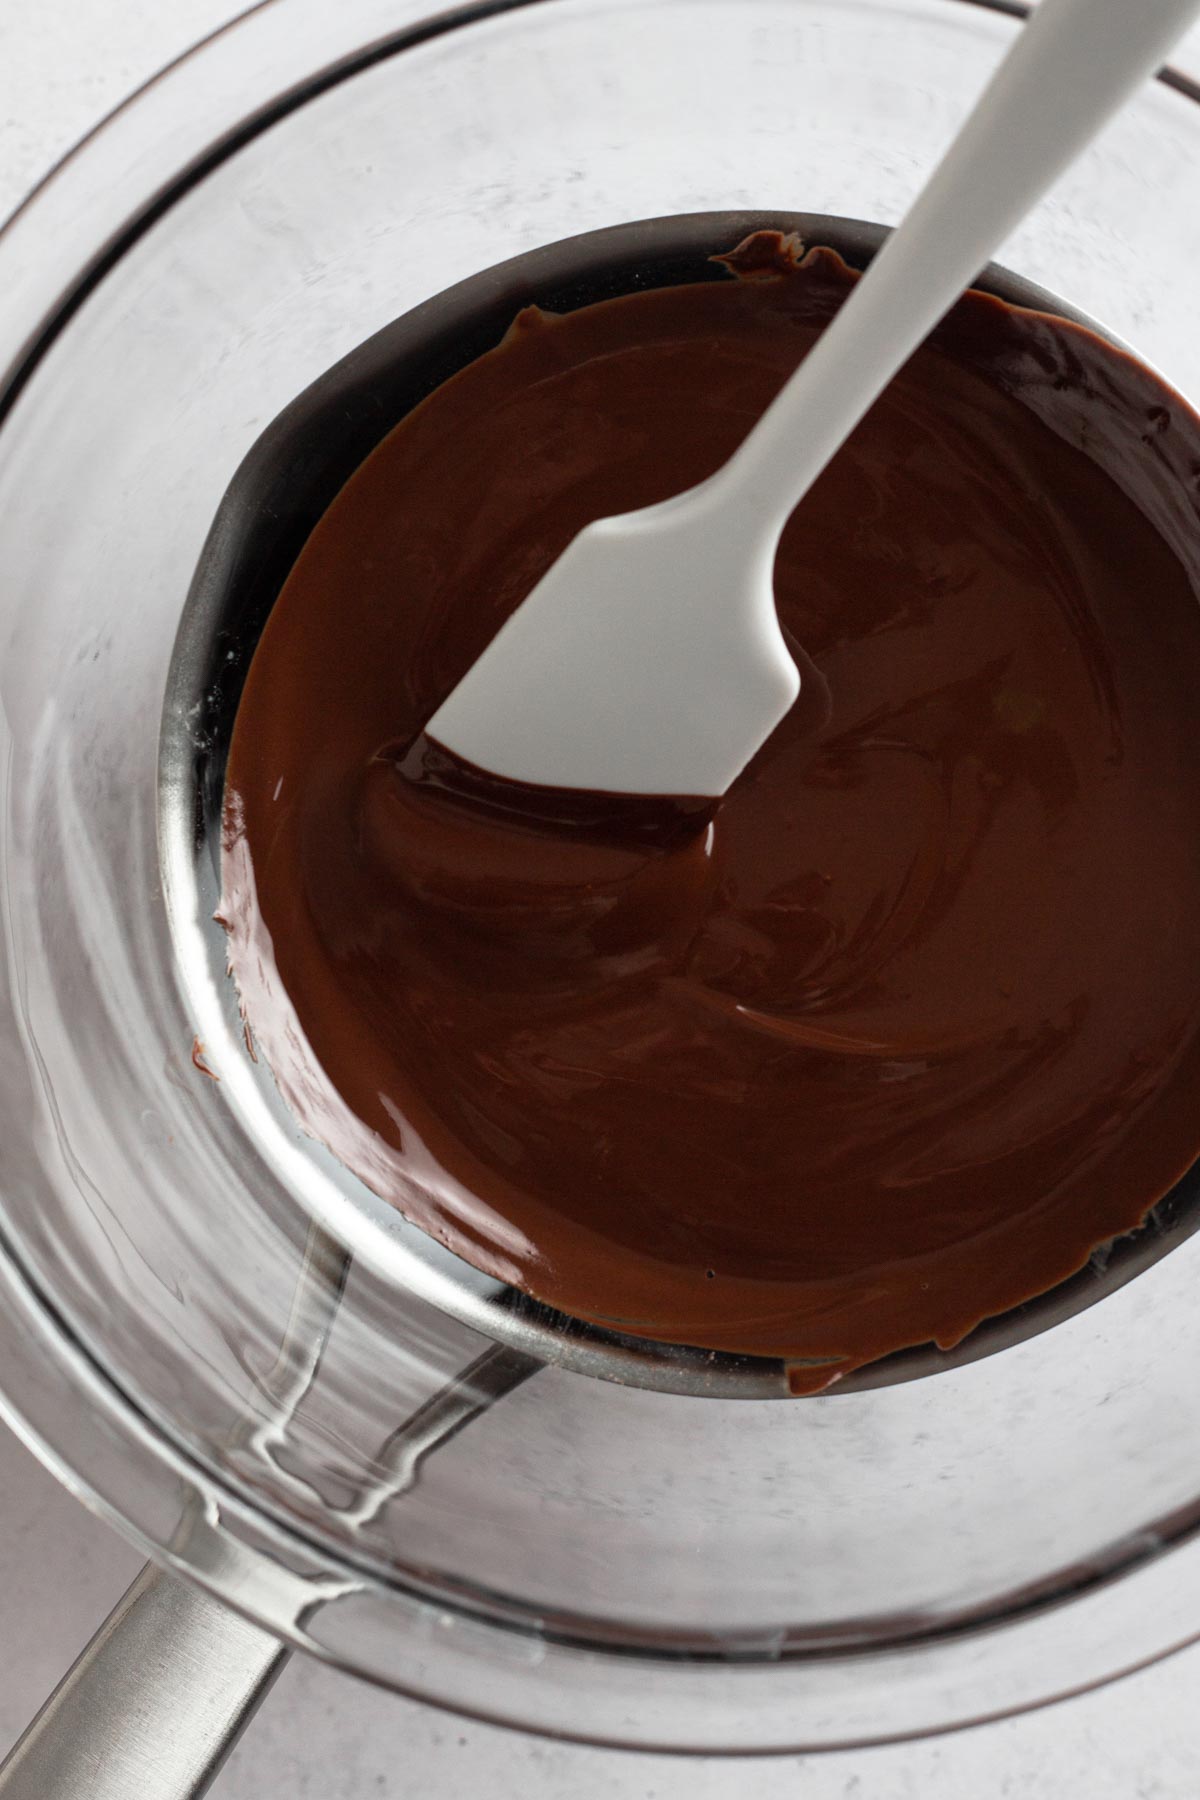 How to Melt Chocolate in a Double Boiler - Always Eat Dessert